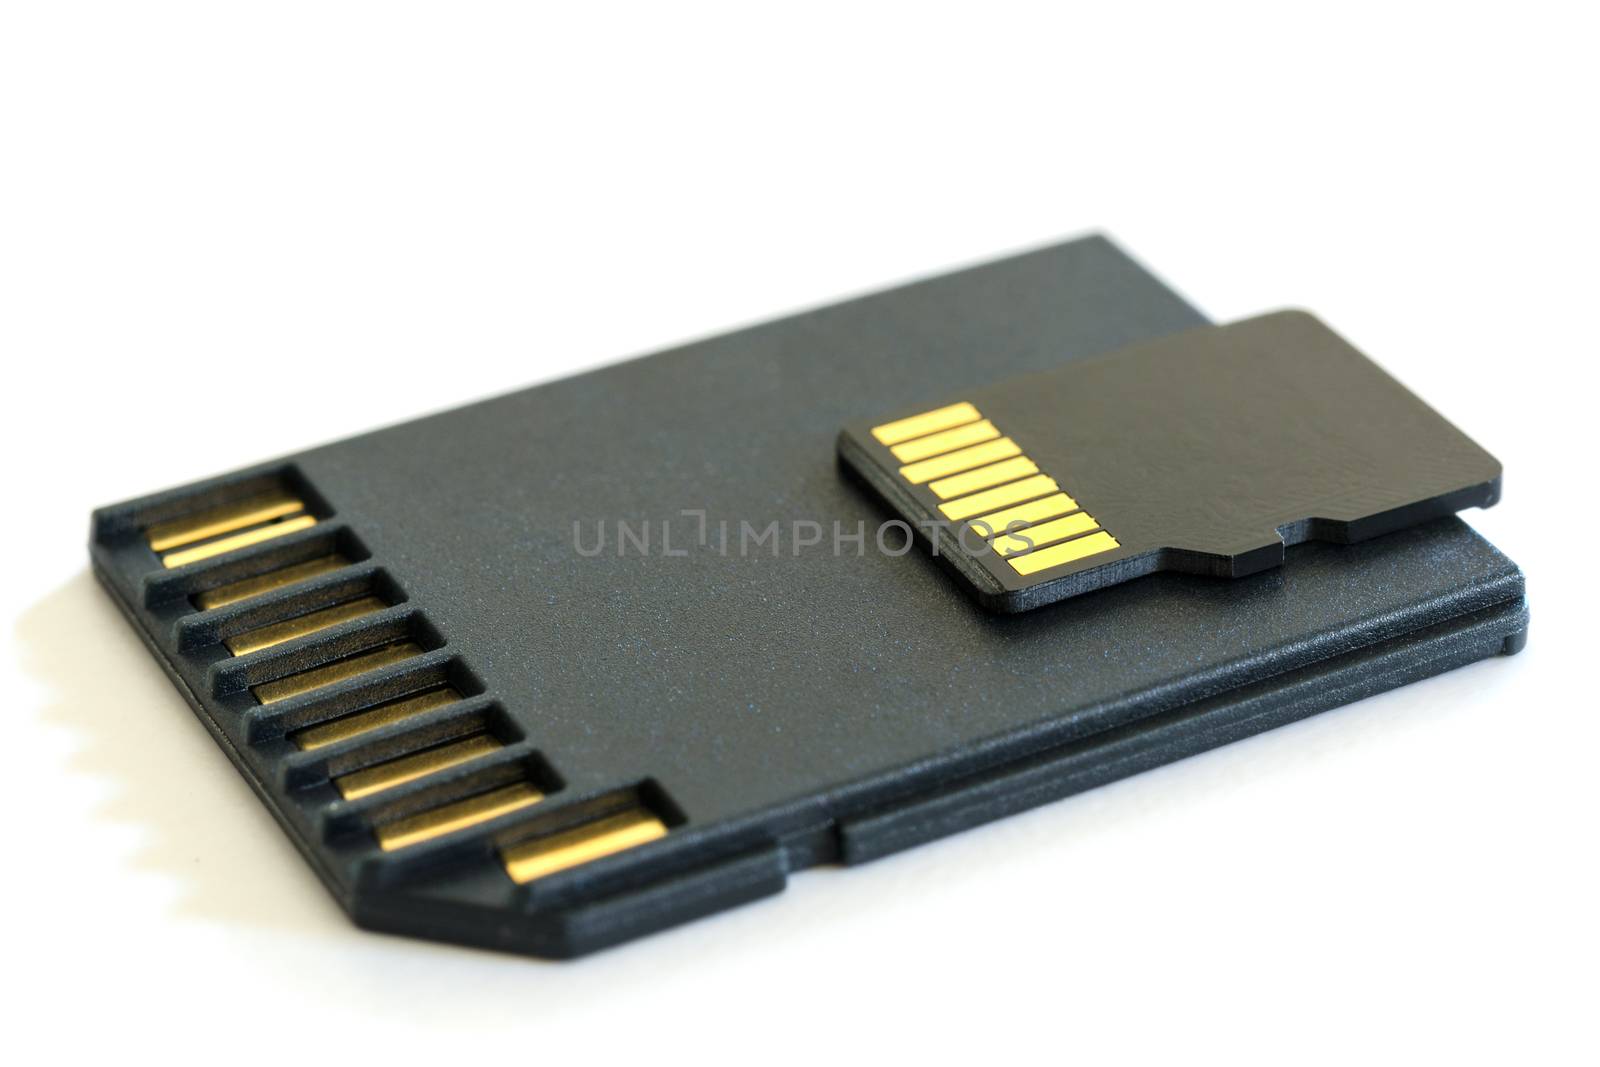 Black microSD memory card and SD card adapter isolated on white with shadow